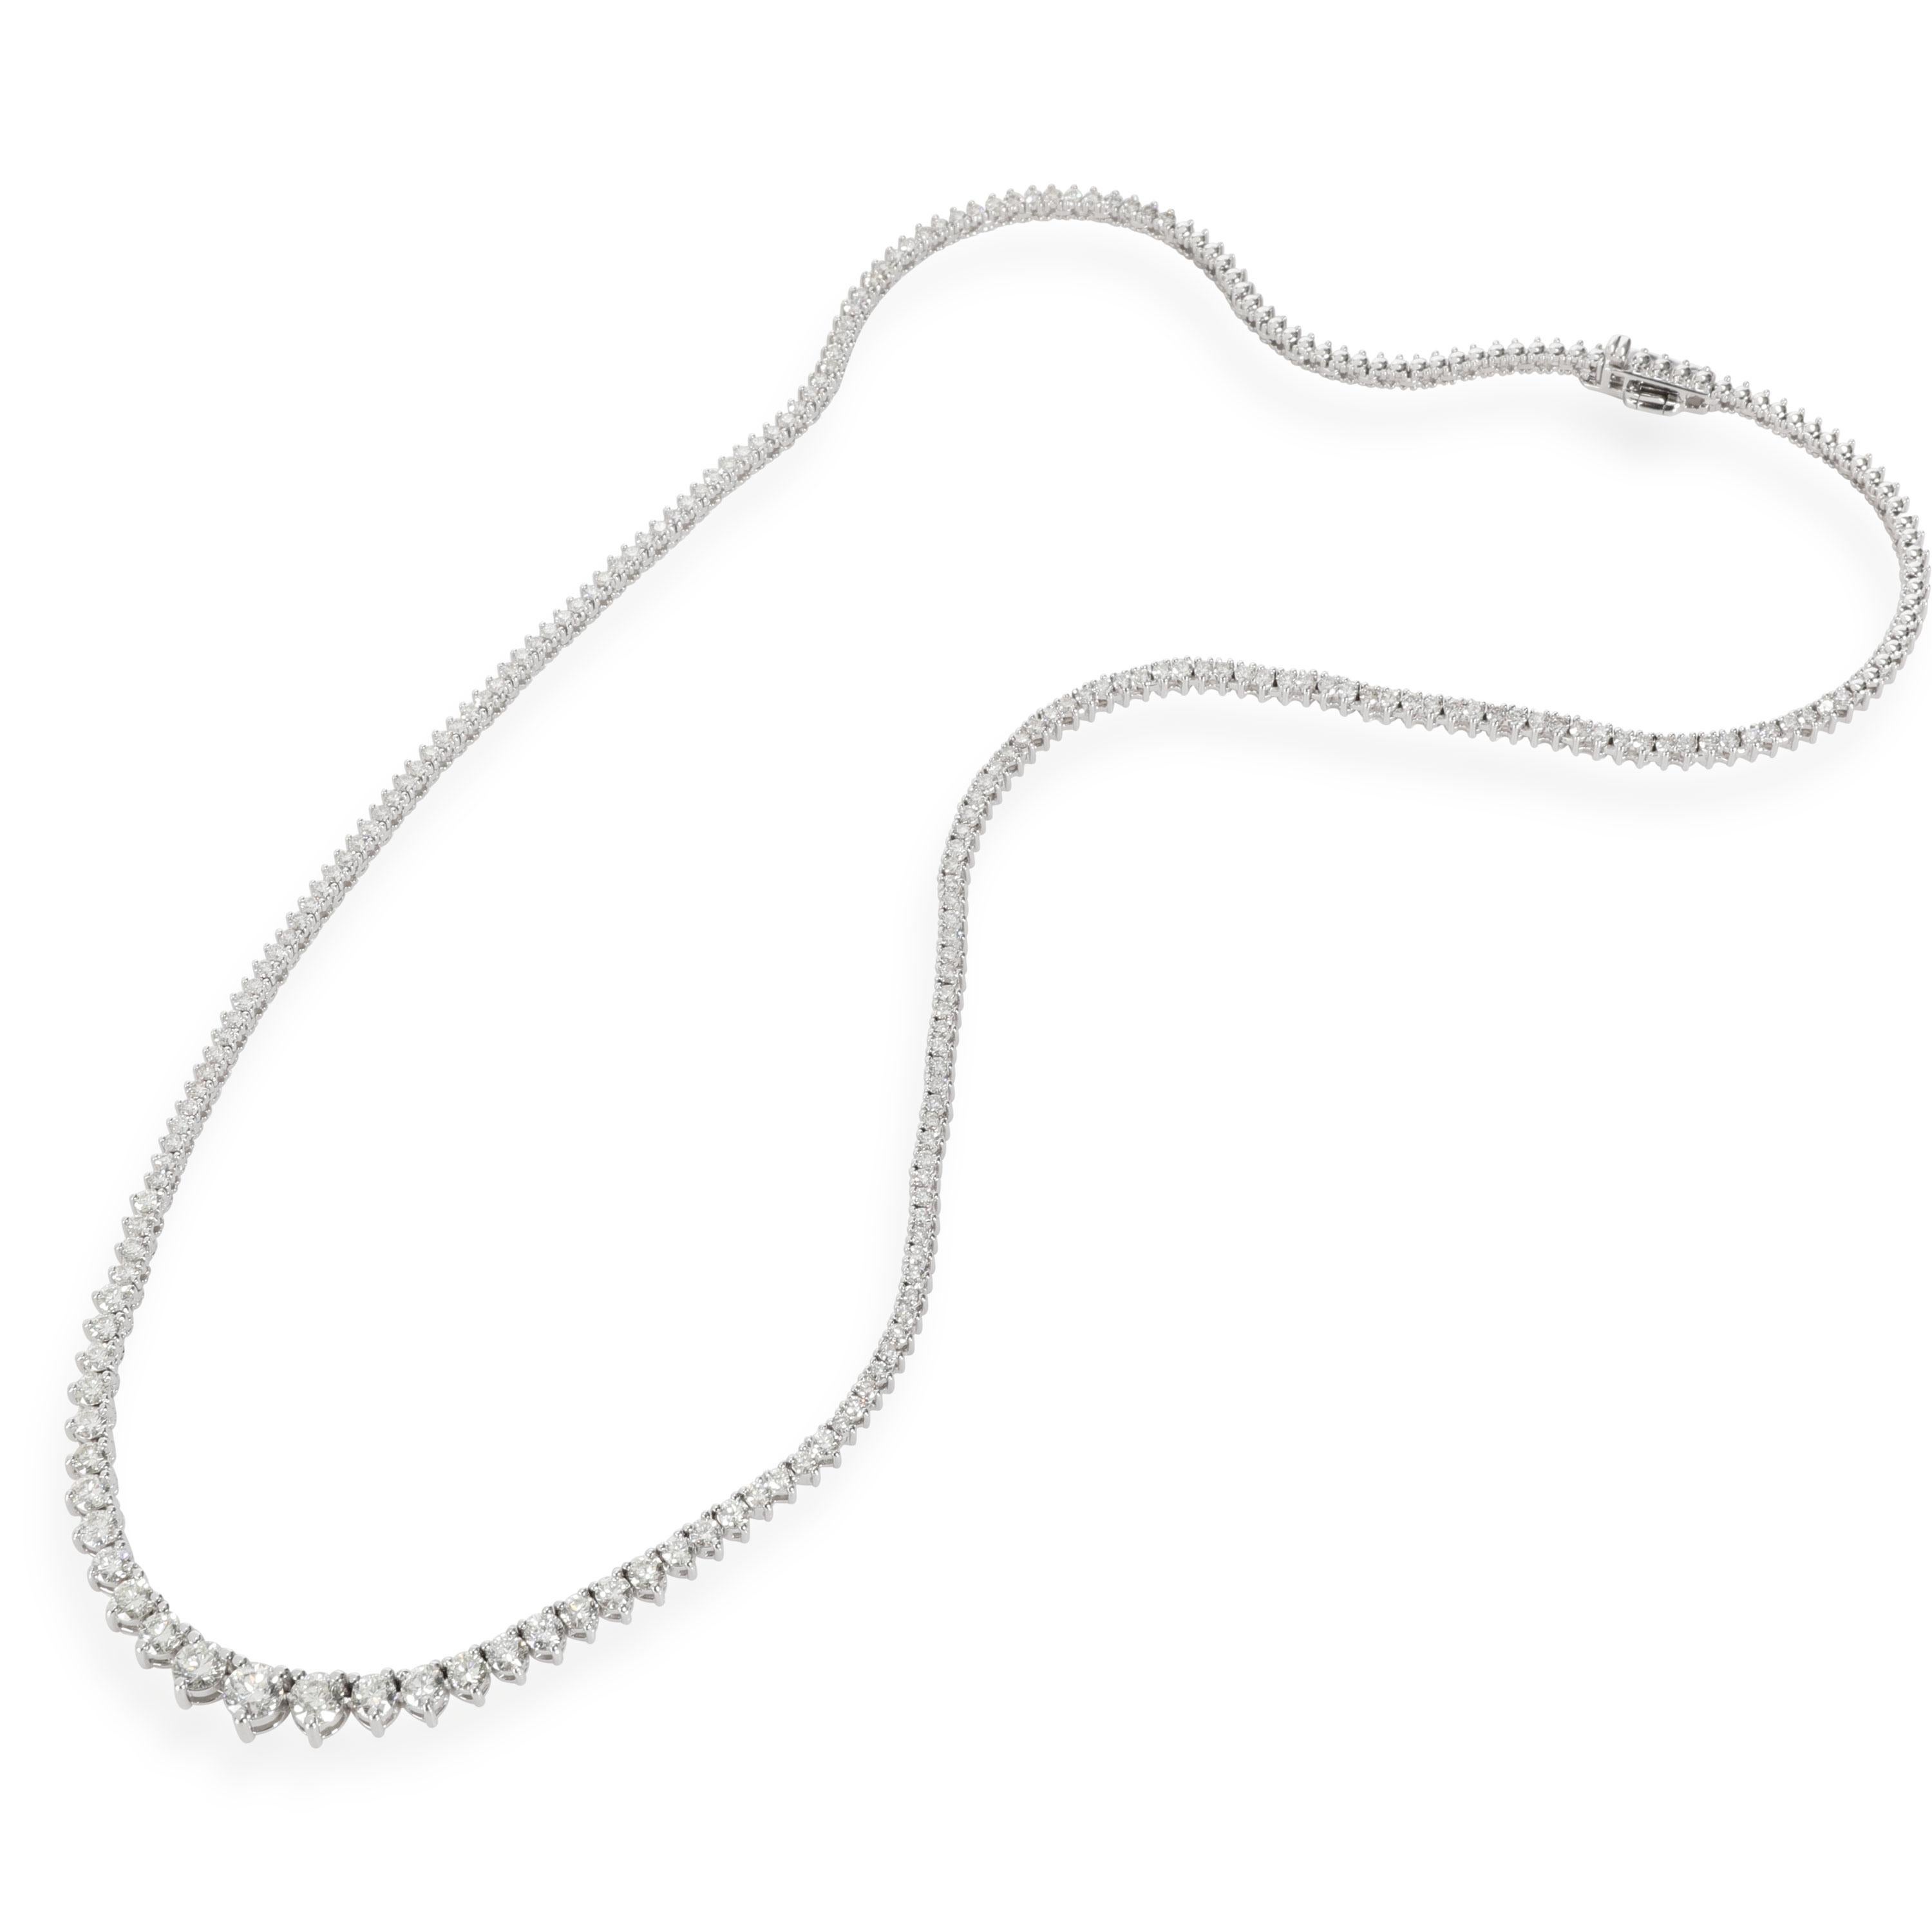 Riviera Diamond Tennis Necklace in 14K White Gold 4.9 CTW

PRIMARY DETAILS
SKU: 110739
Listing Title: Riviera Diamond Tennis Necklace in 14K White Gold 4.9 CTW
Condition Description: Retails for 10,000 USD. In excellent condition and recently